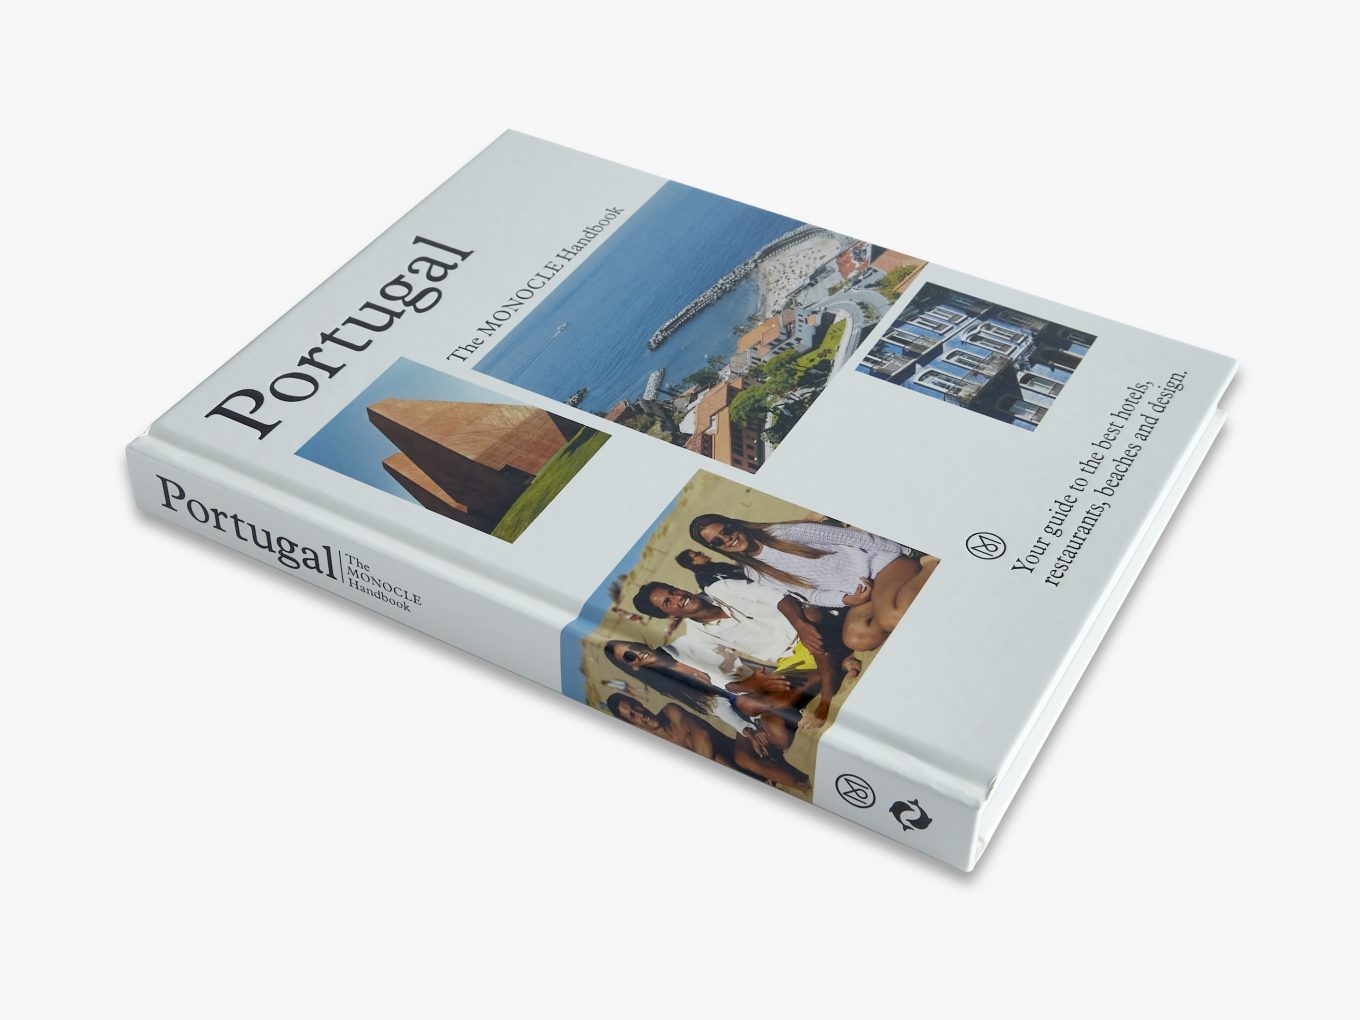 portugal monocle travel book